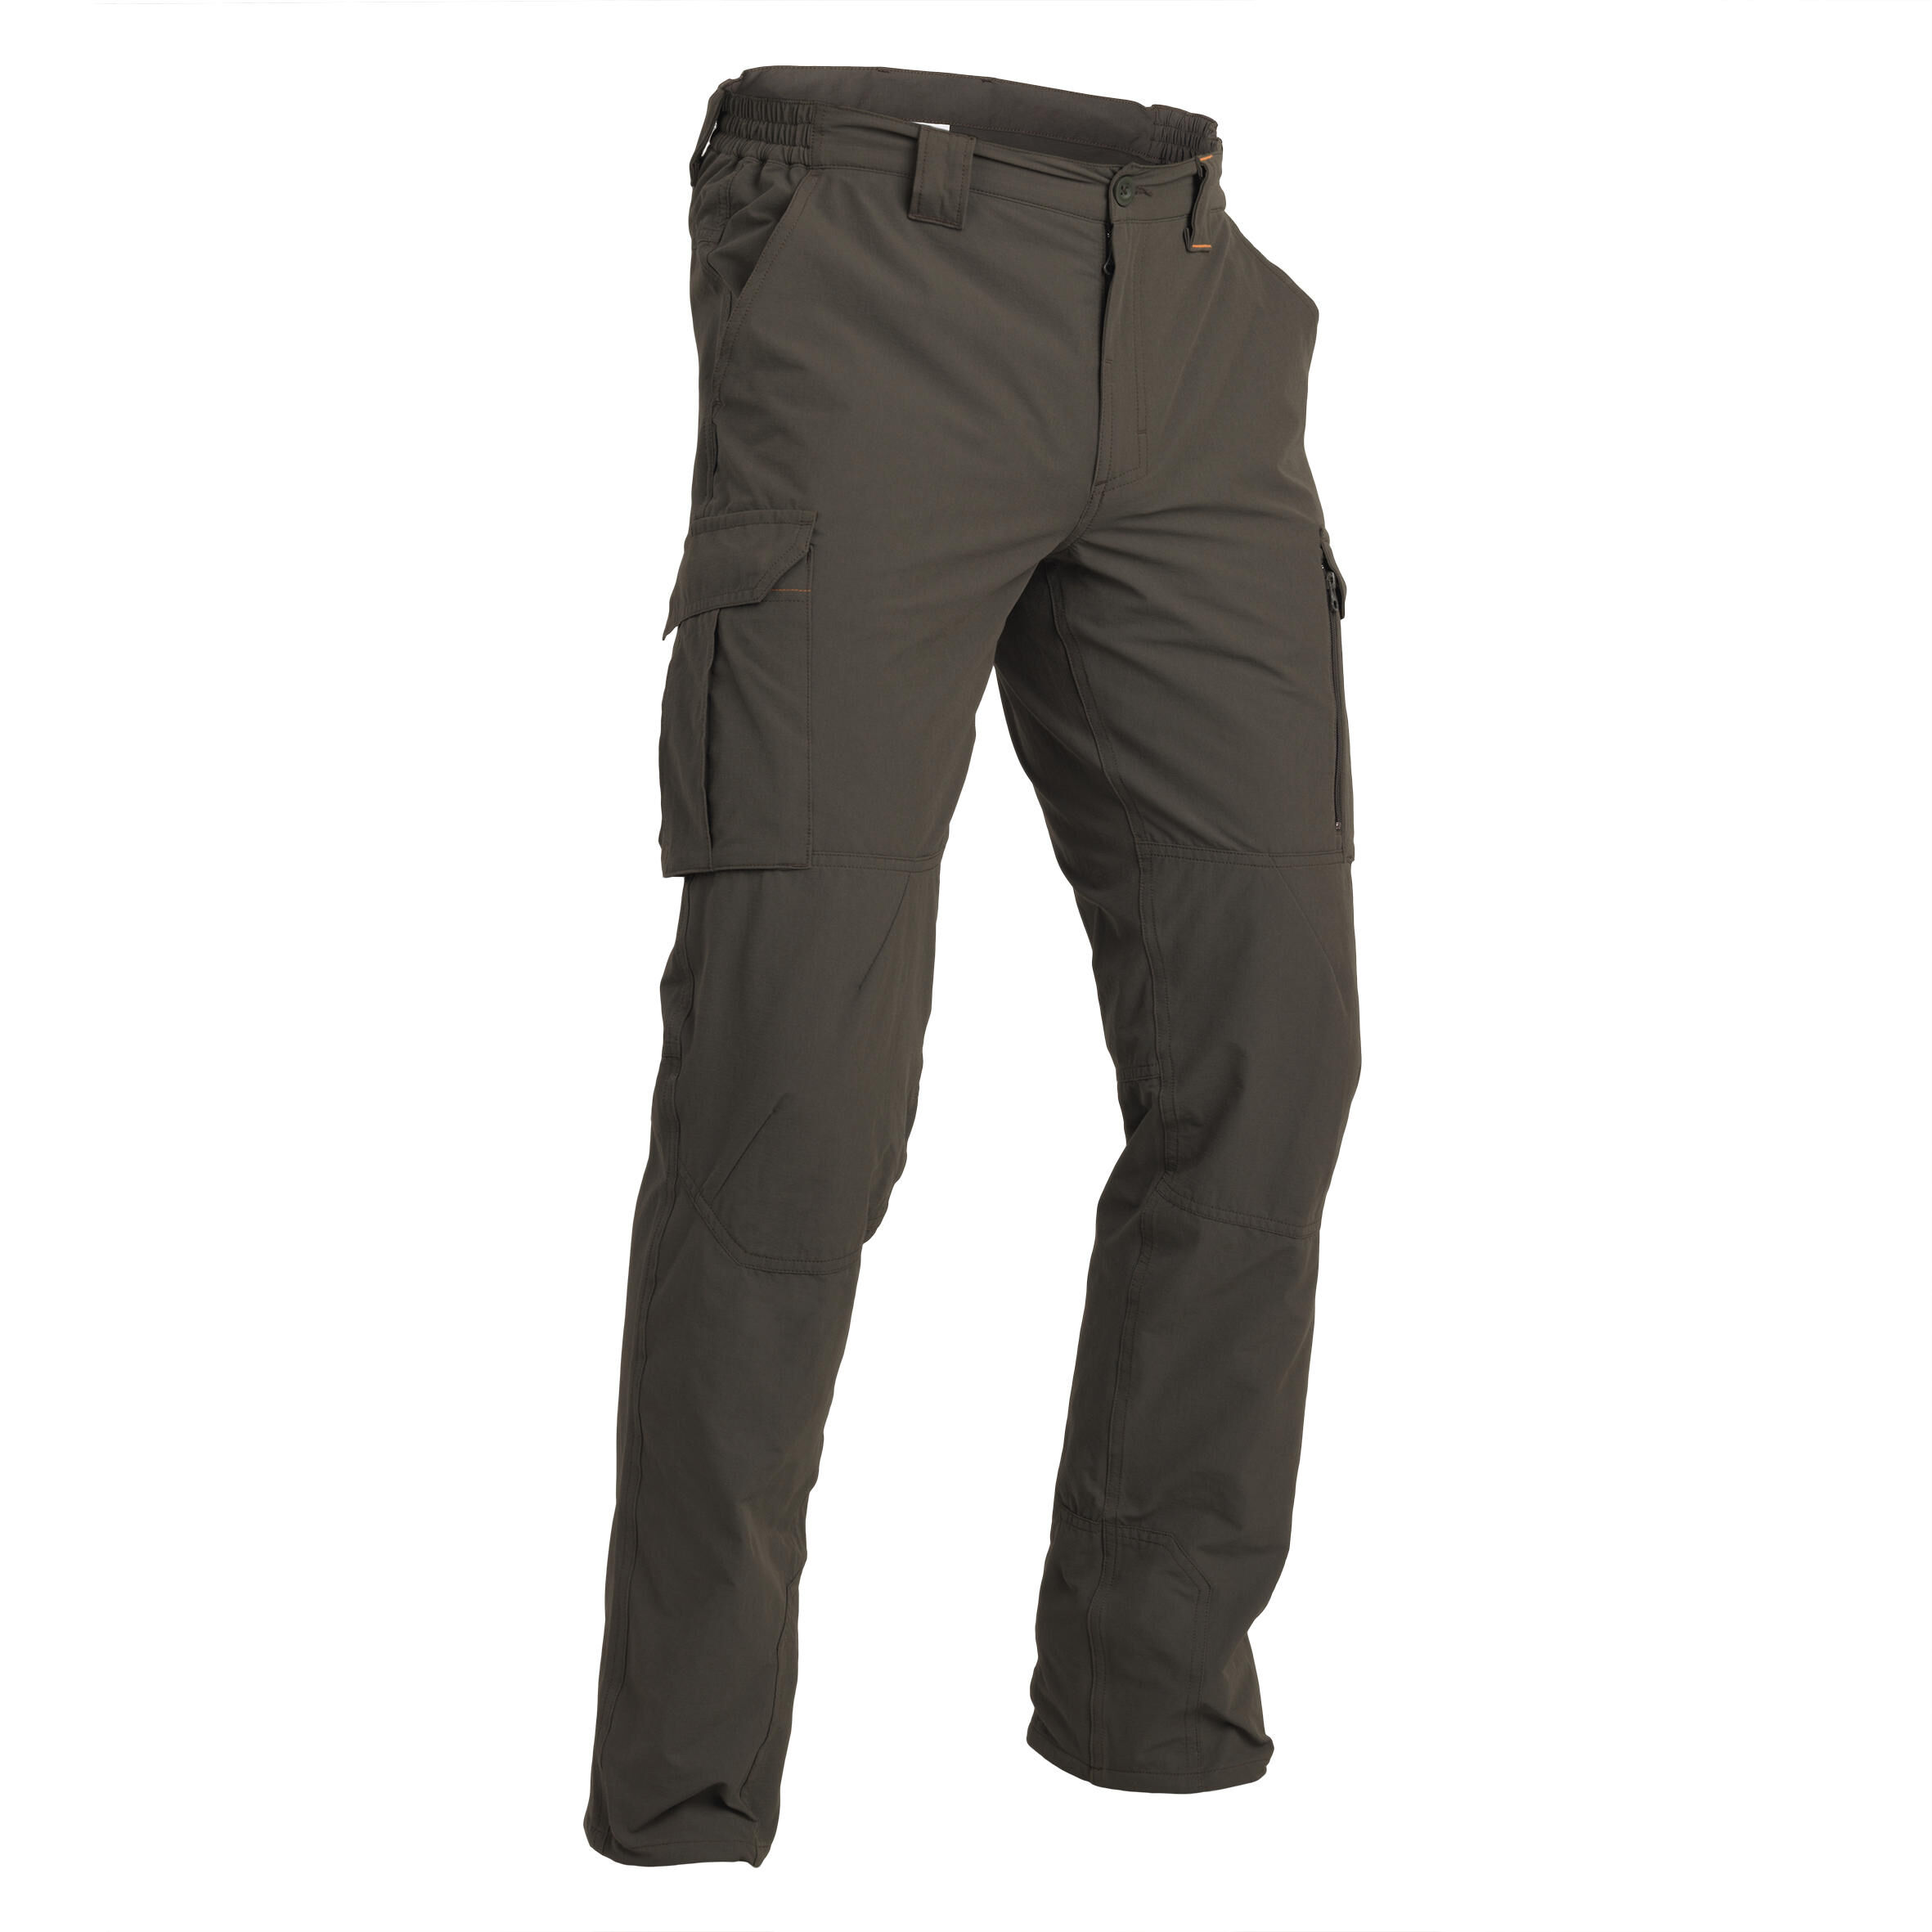 SOLOGNAC Men's Country Sport Lightweight Breathable Trousers - 500 Green